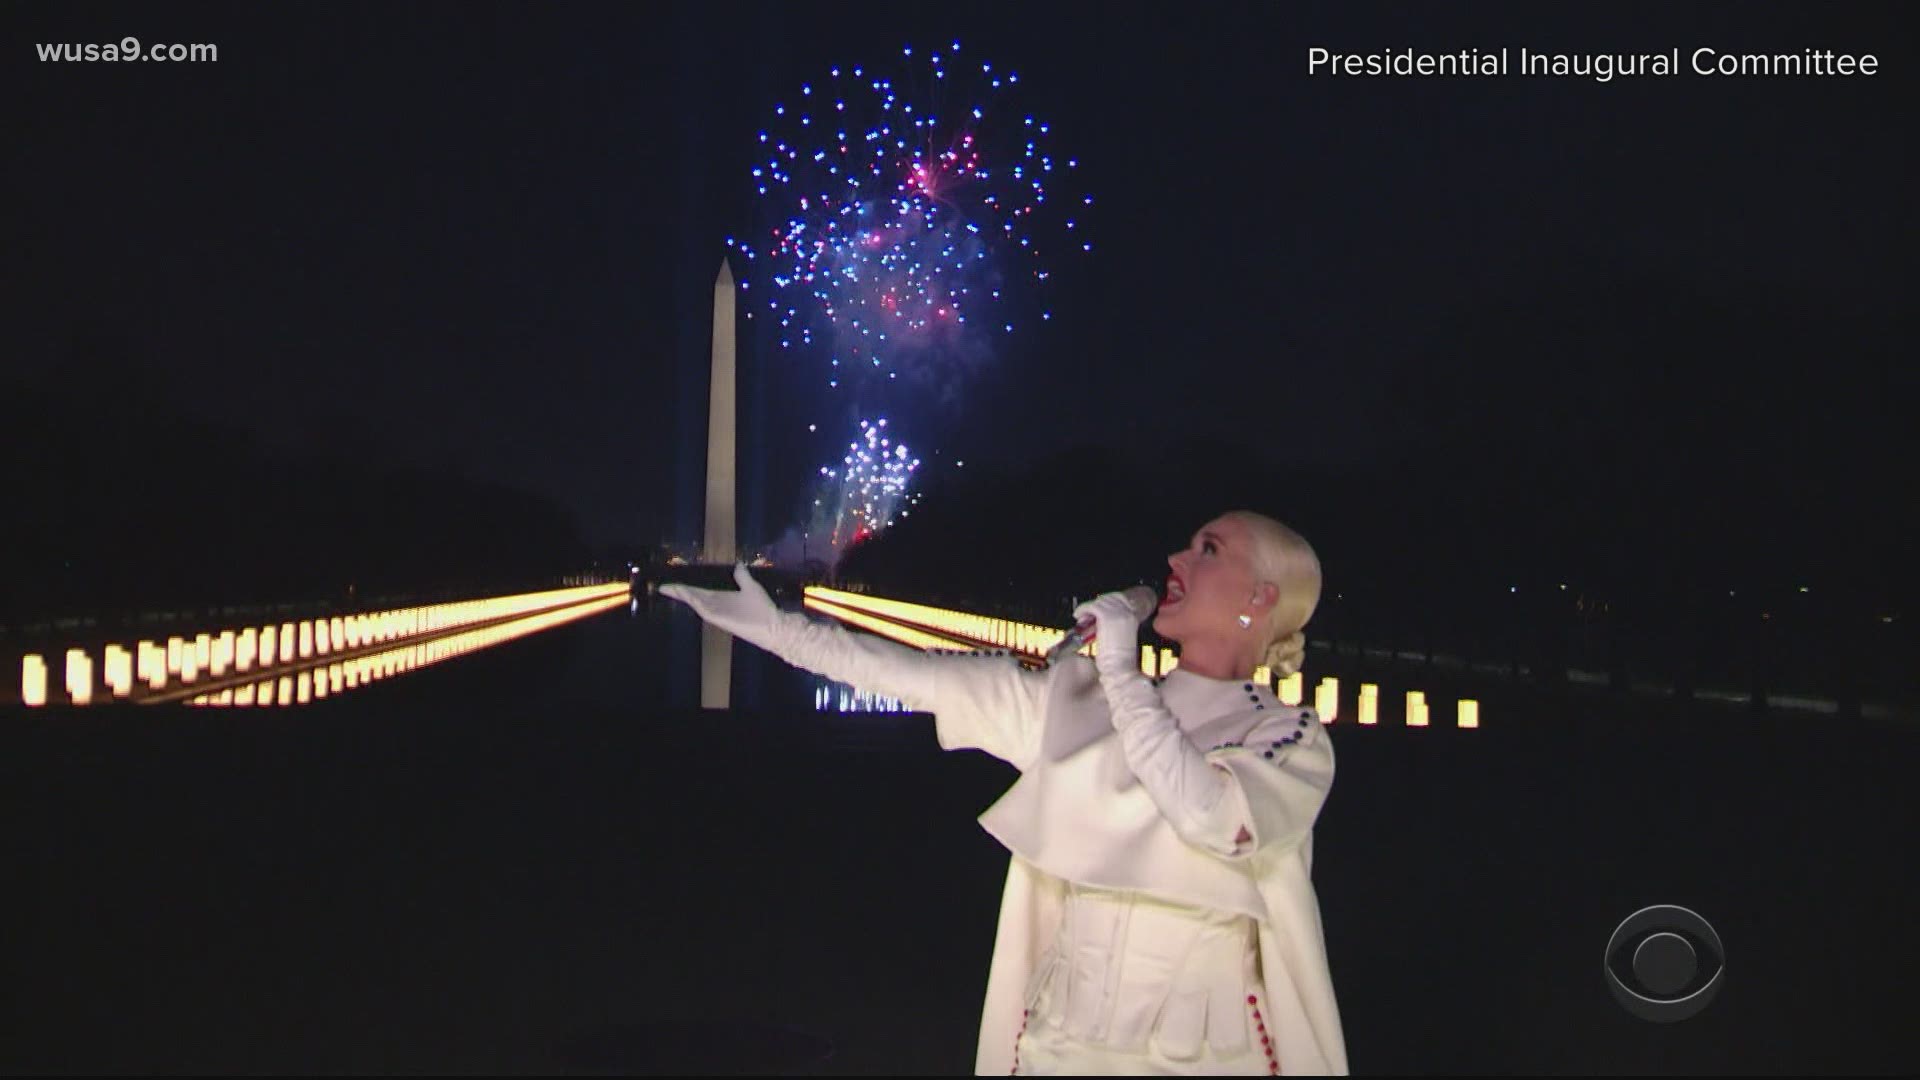 Katy Perry, Lady Gaga and the secret behind the Presidential Inauguration fireworks show